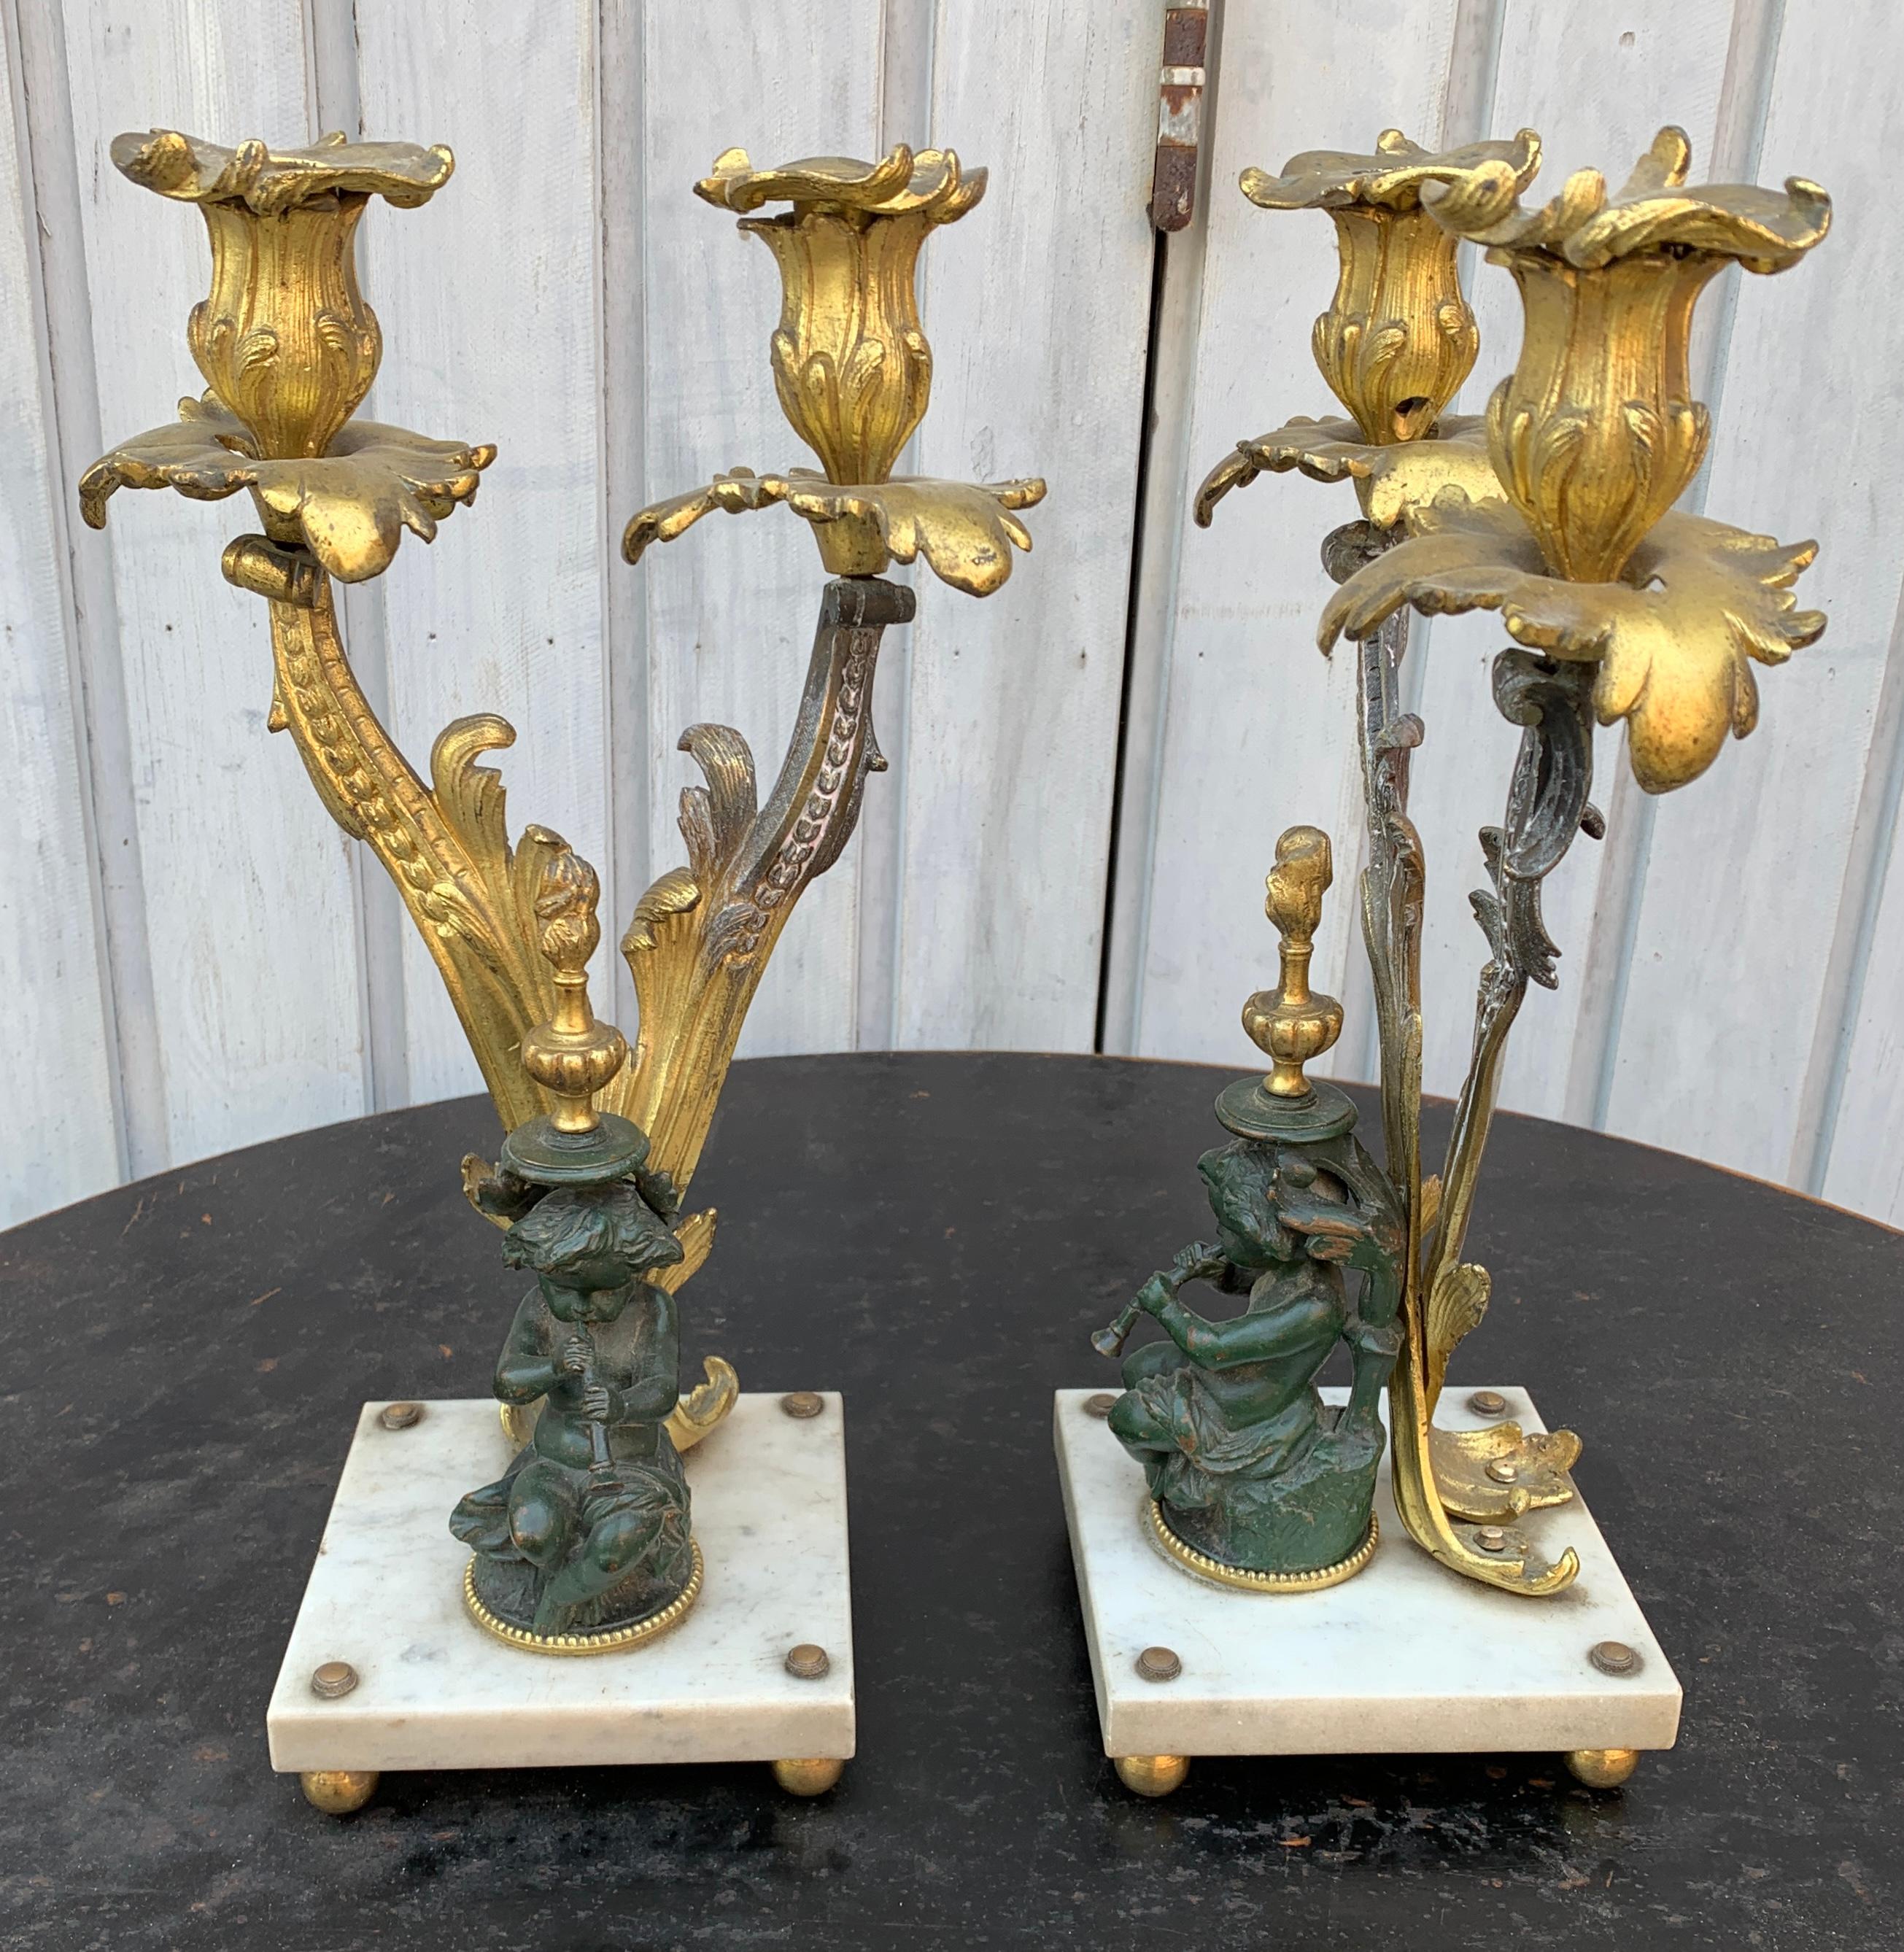 Carrara Marble Pair of Napoleon III French Bronze Candelabra on Marble Base